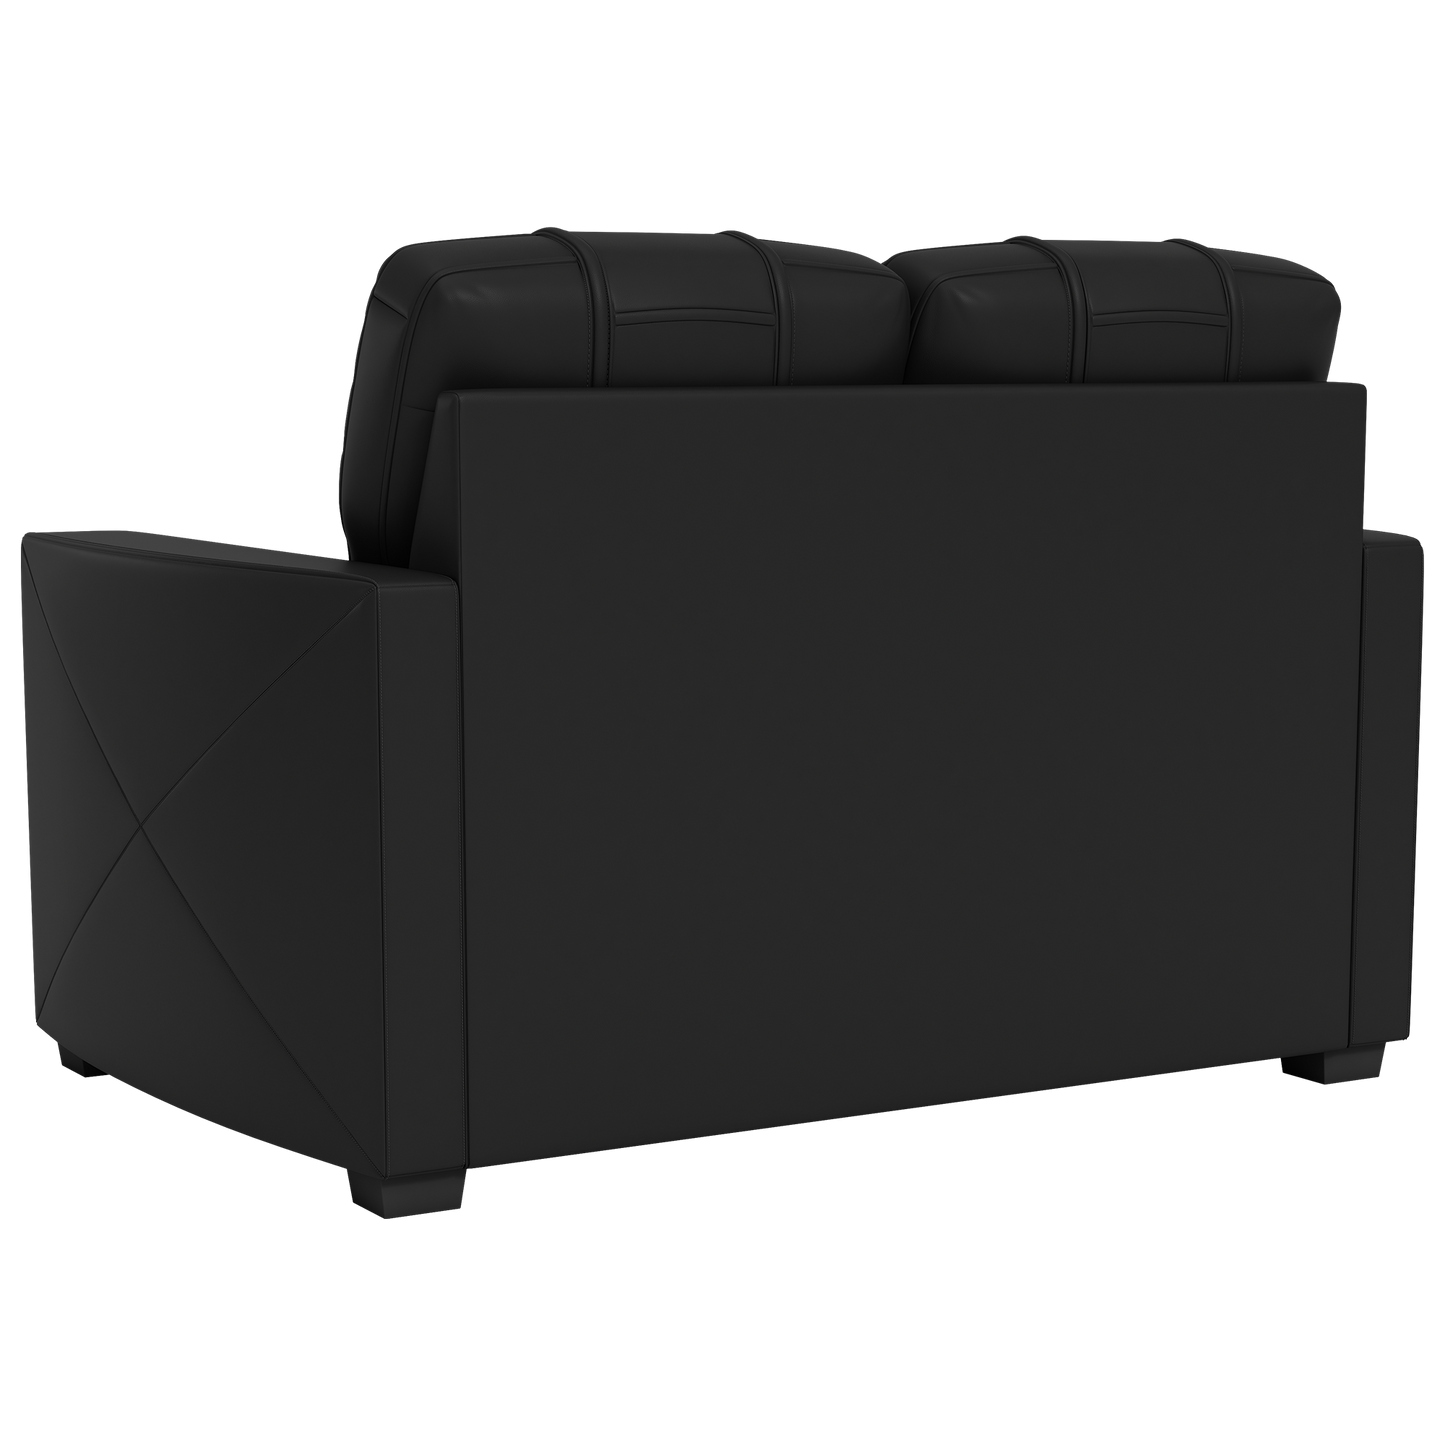 Silver Loveseat Heat Check Gaming Secondary